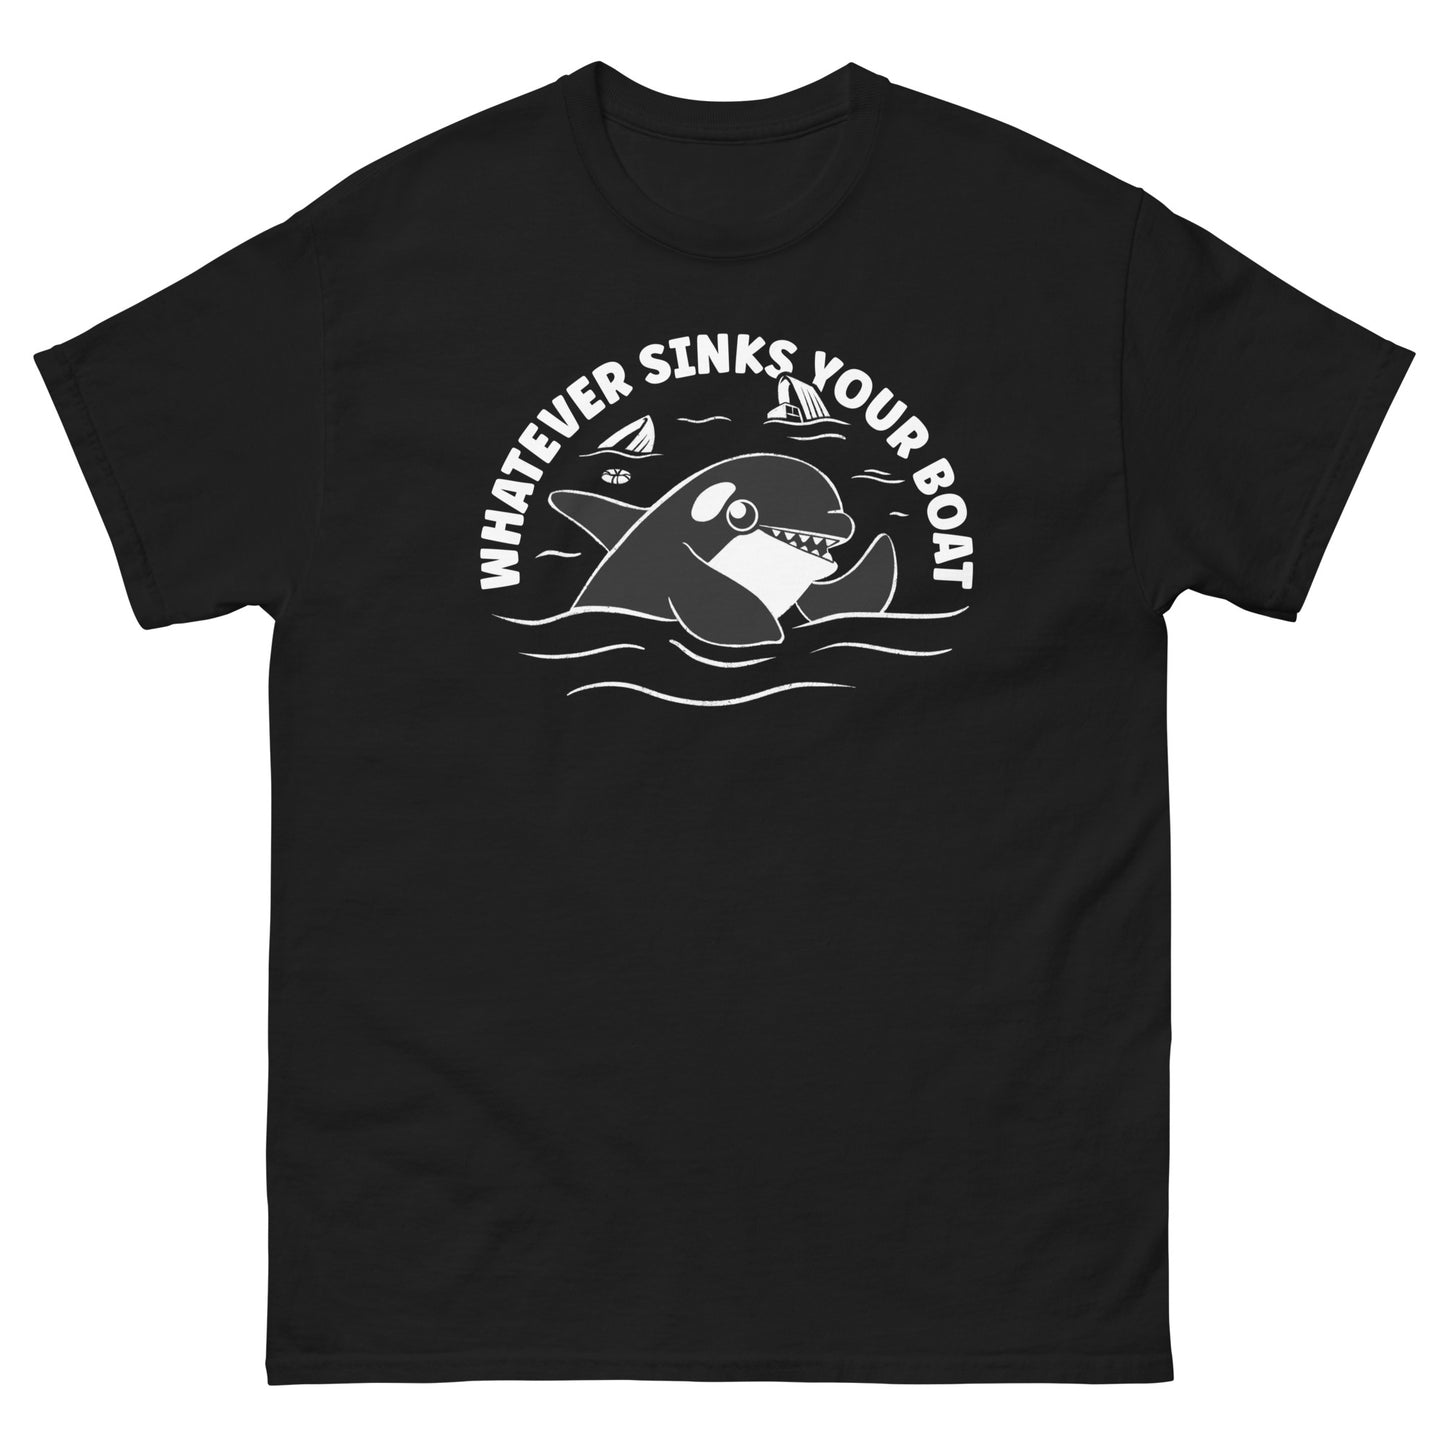 Whatever Sinks Your Boat - Funny Orca Attack Boats Tee